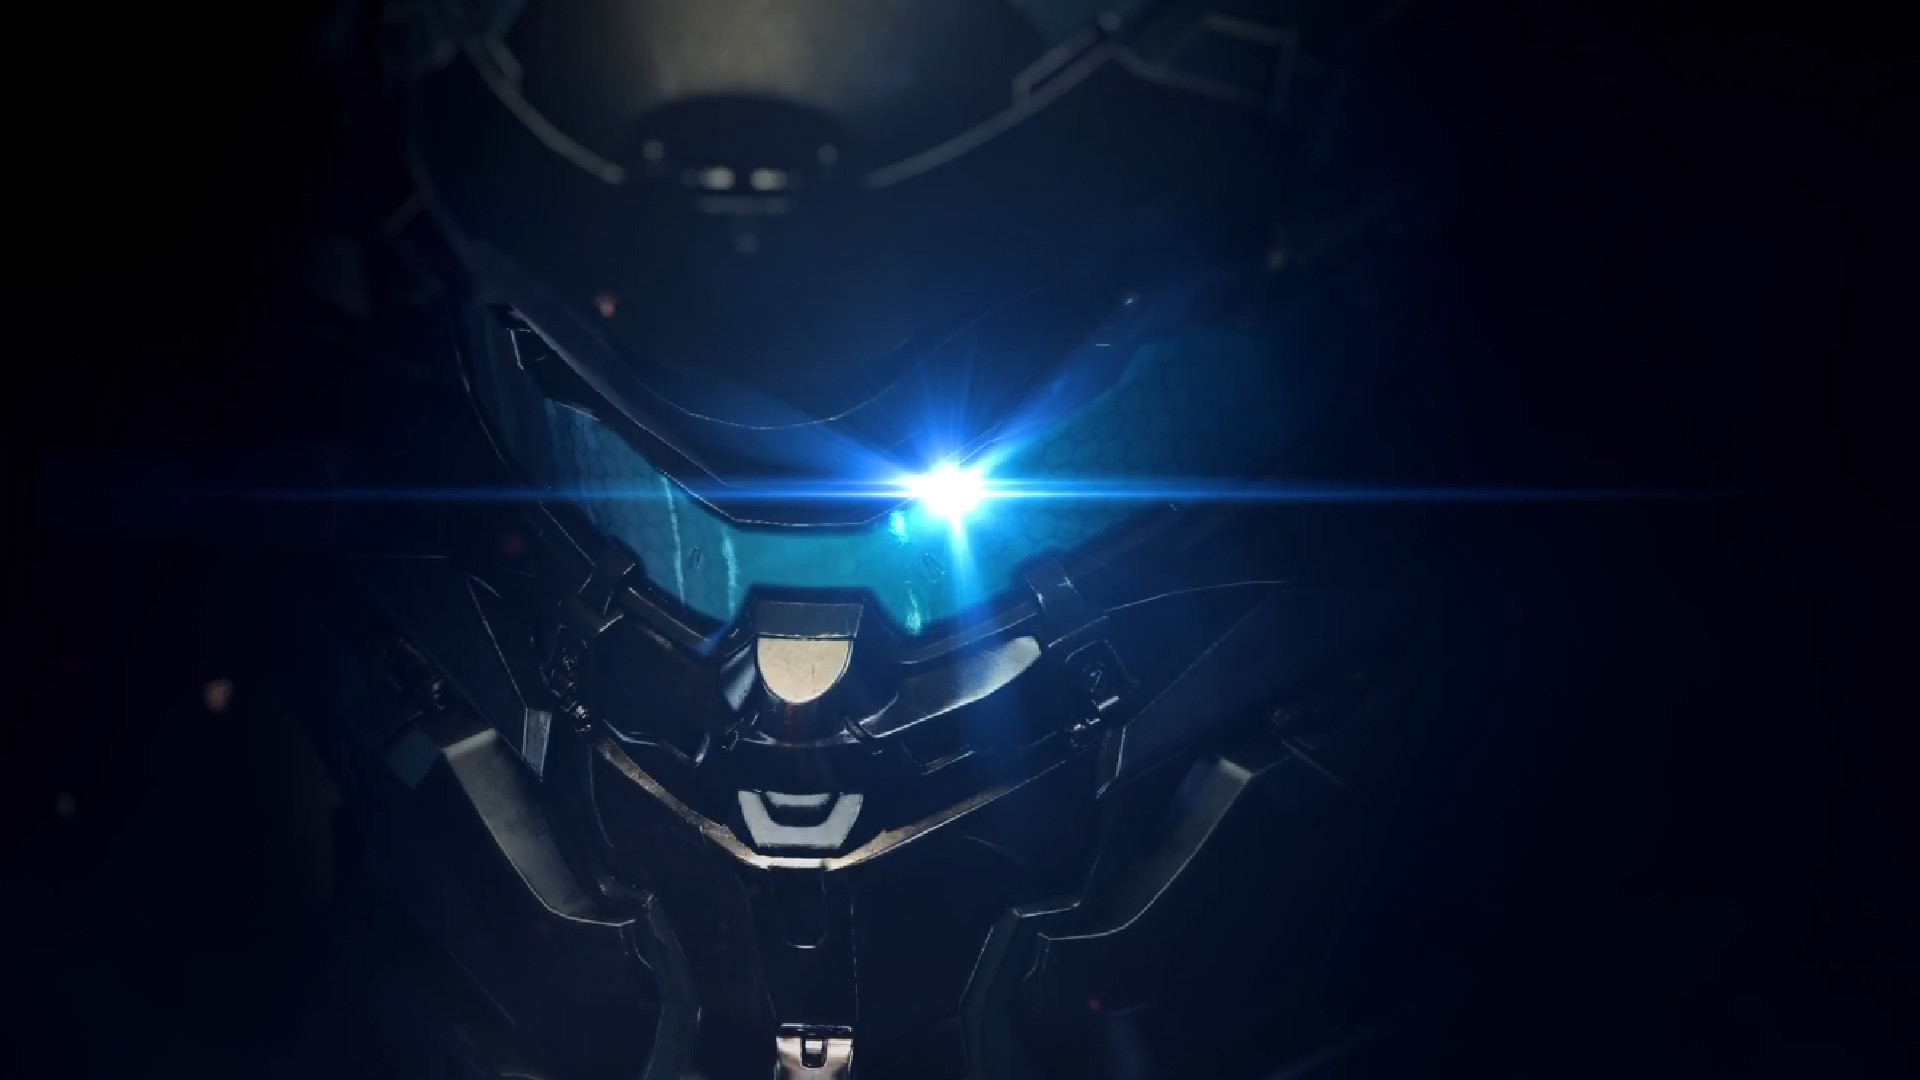 Halo 5: Guardians | Wallpapers from the Animated Poster